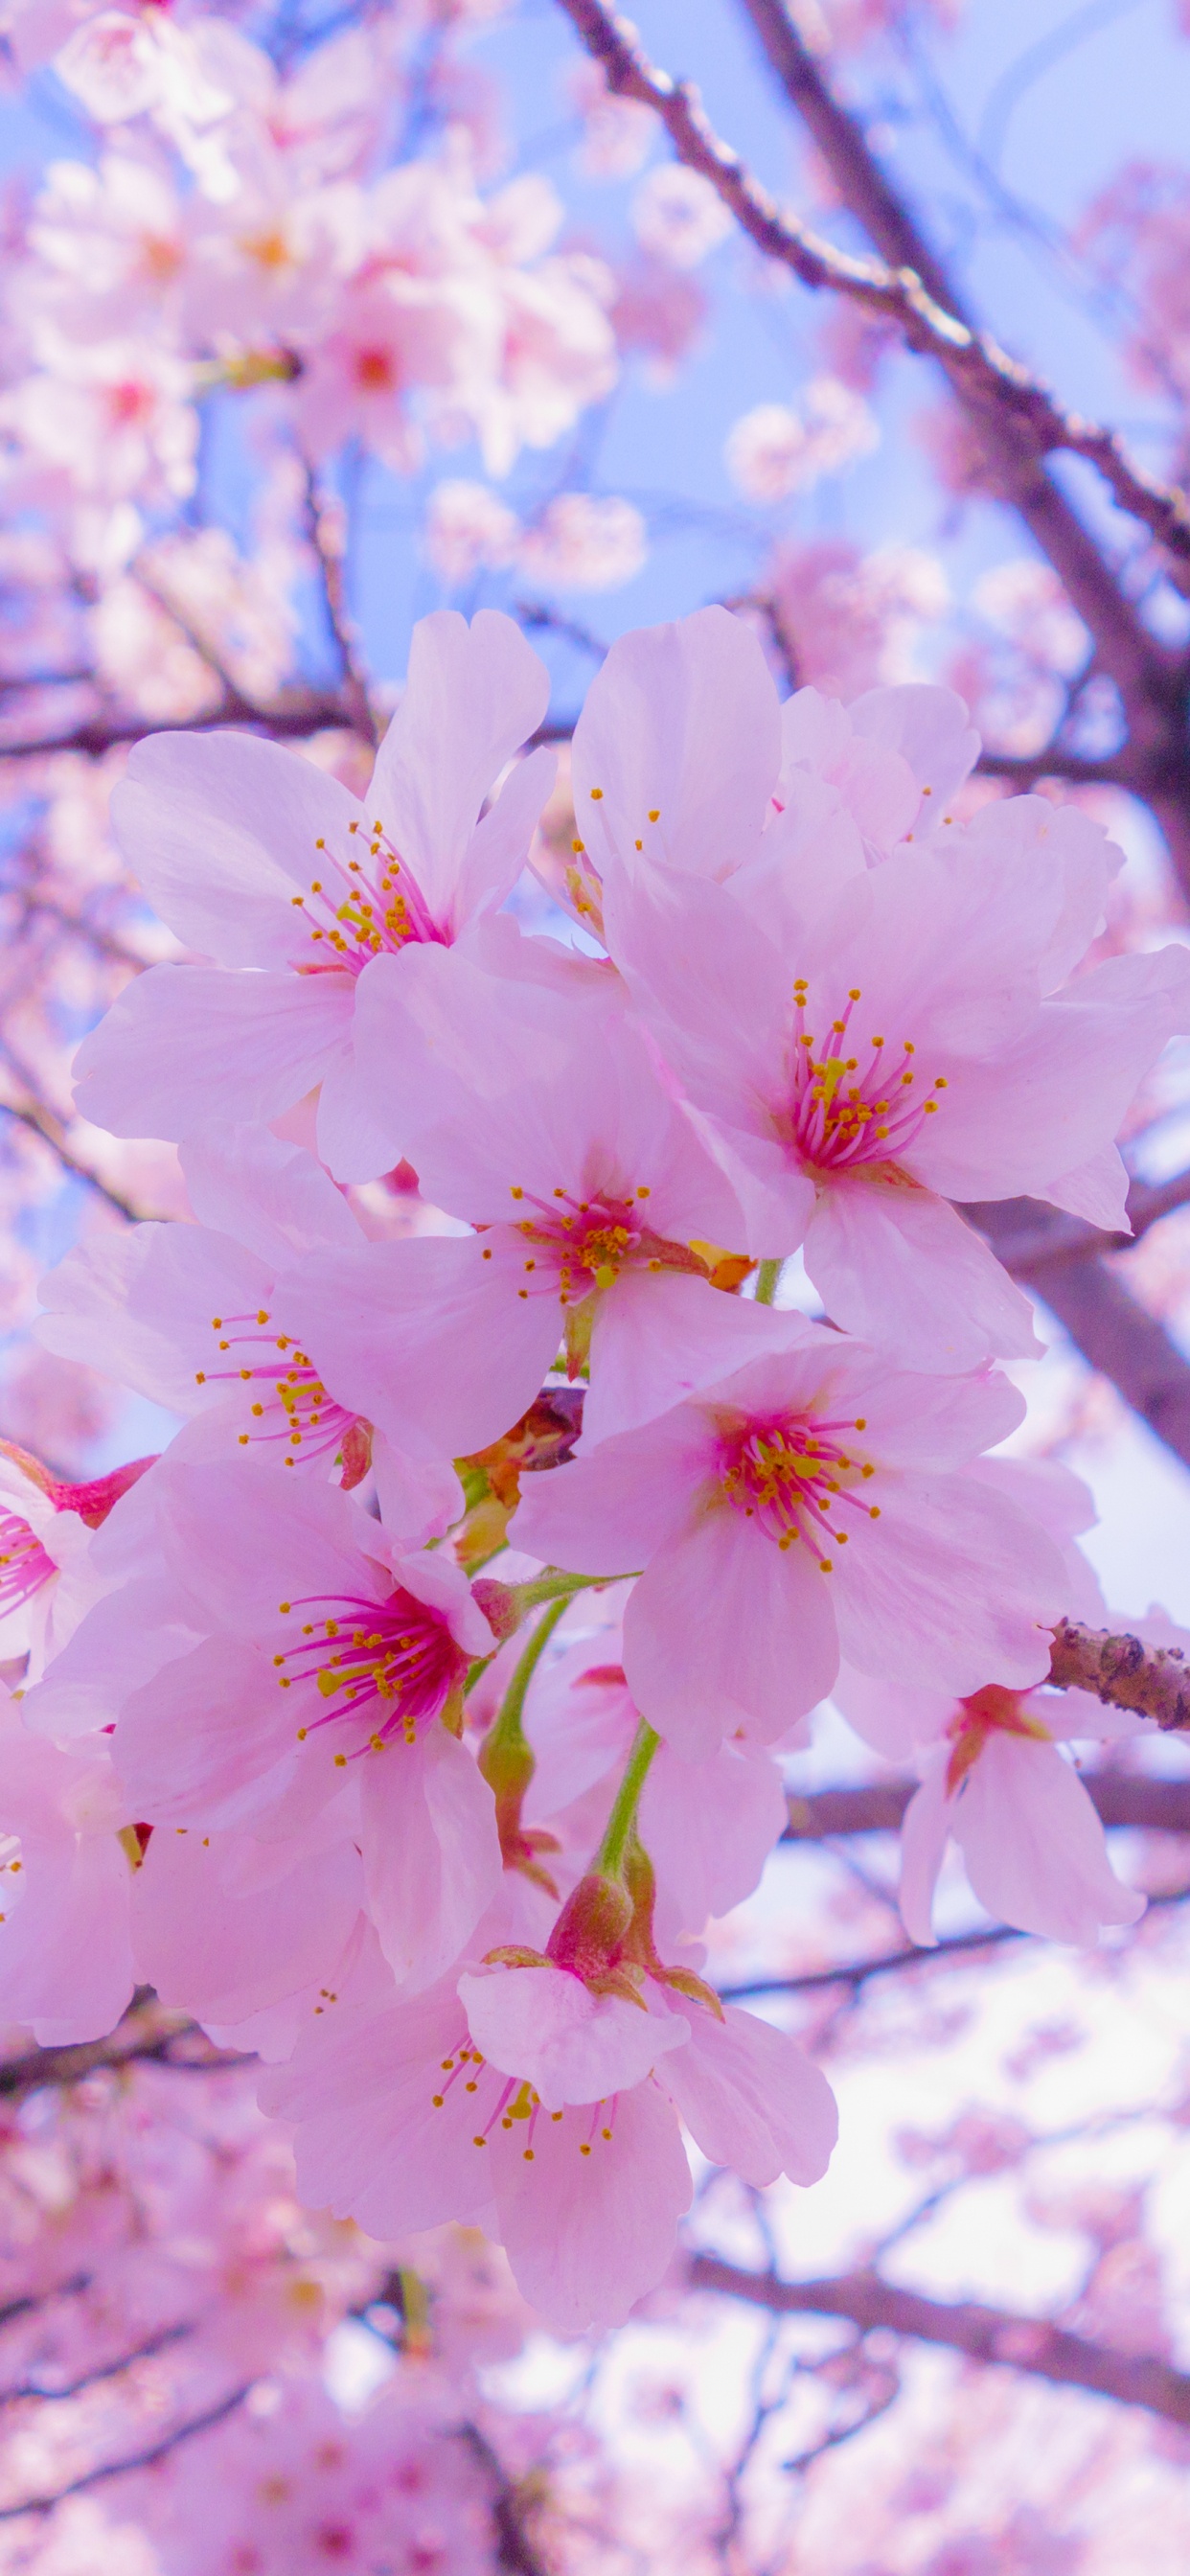 Pink Cherry Blossom Tree During Daytime. Wallpaper in 1242x2688 Resolution